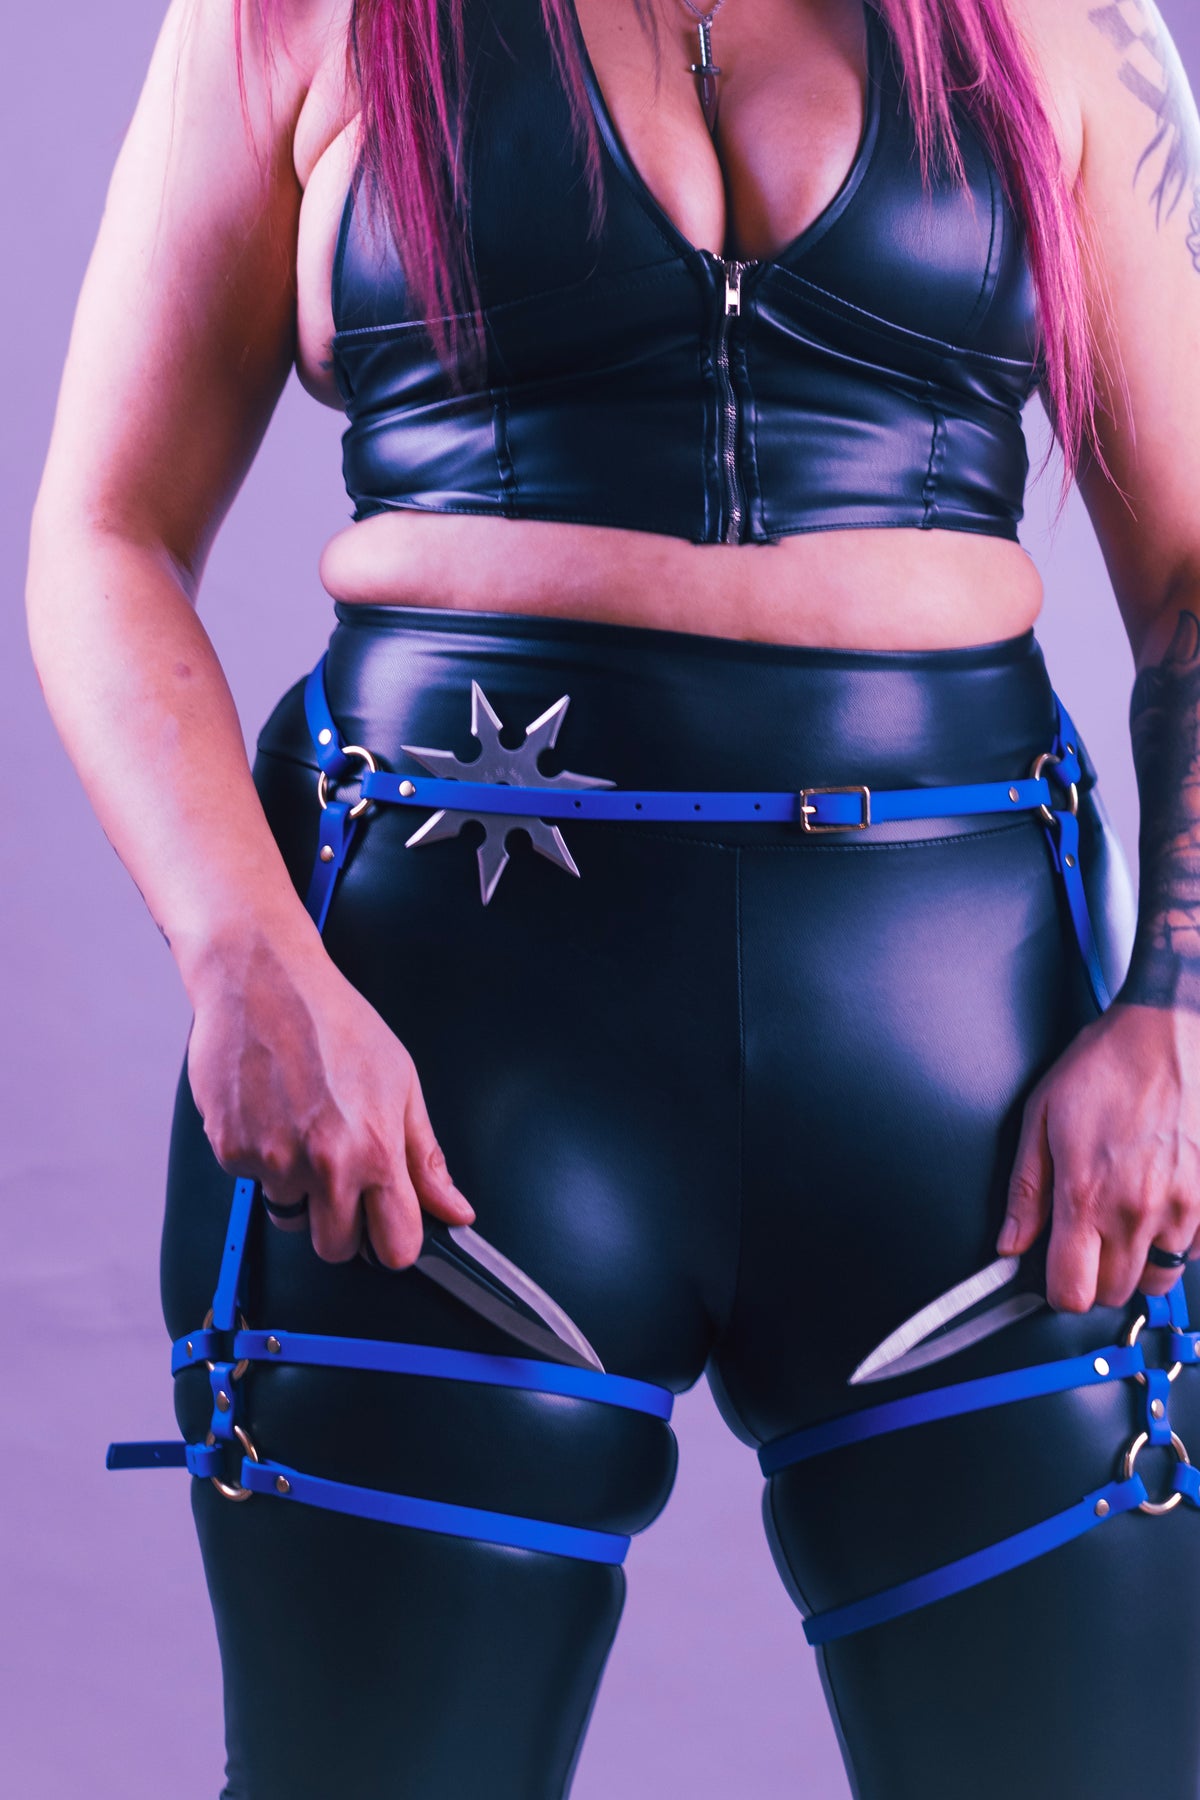 Closeup of woman in an electric blue classic thigh harness.